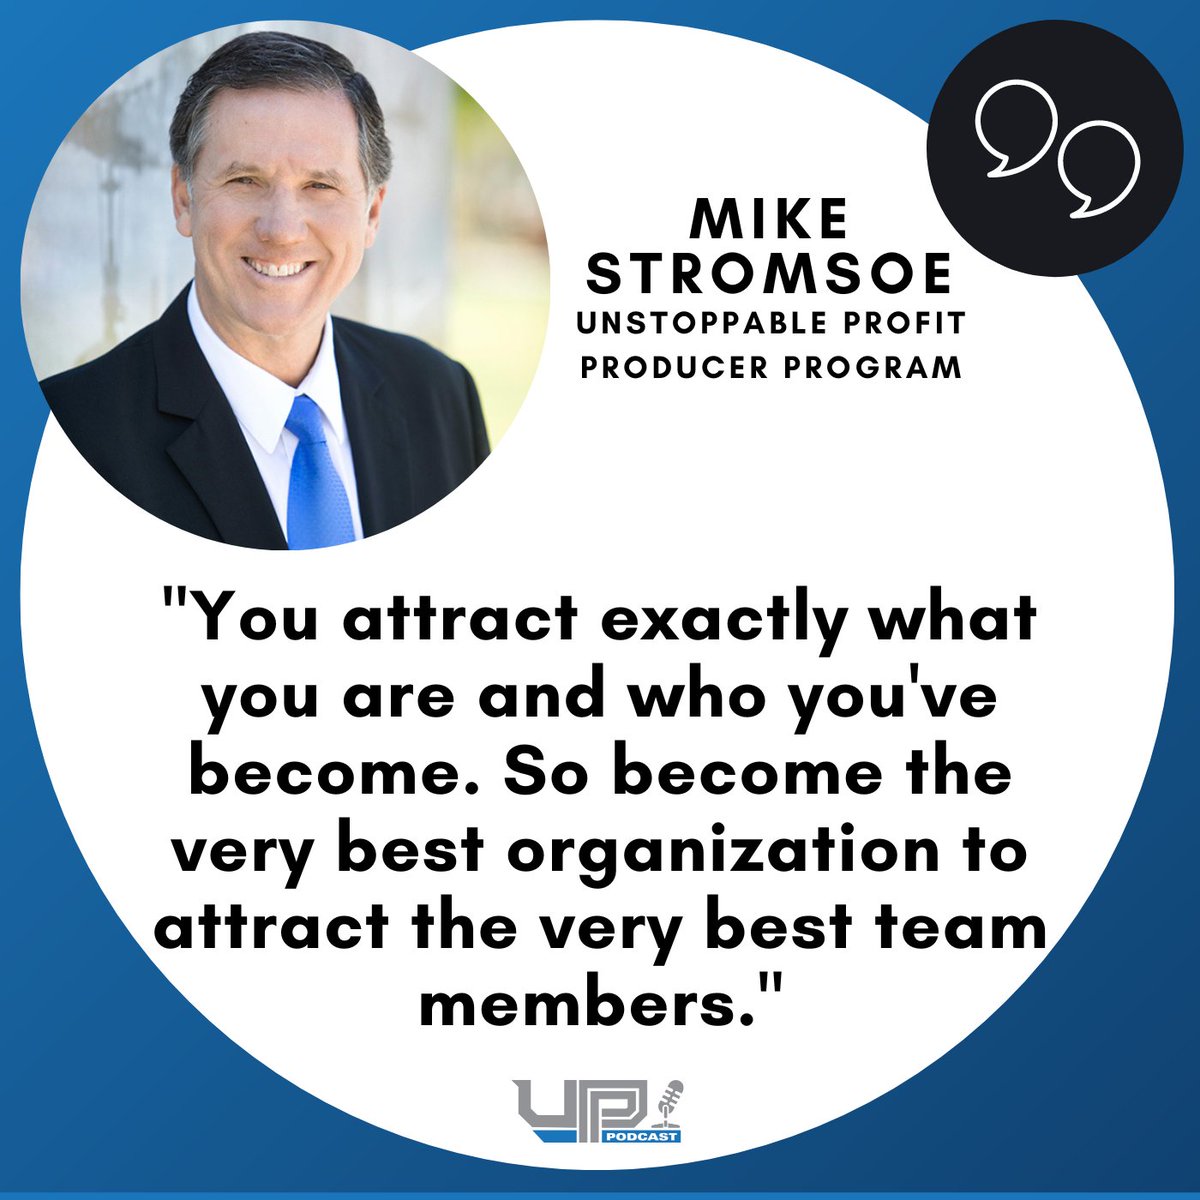 Continue to enhance your leadership skills and elevate your agency’s performance.

Listen: bit.ly/UPPE247
Watch: bit.ly/UPPYT247

#UPPLife #Entrepreneur #Leadership #Coaching #Insurance #JobDescriptions #Hiring #Skills #Abilities #Engagement #Employee